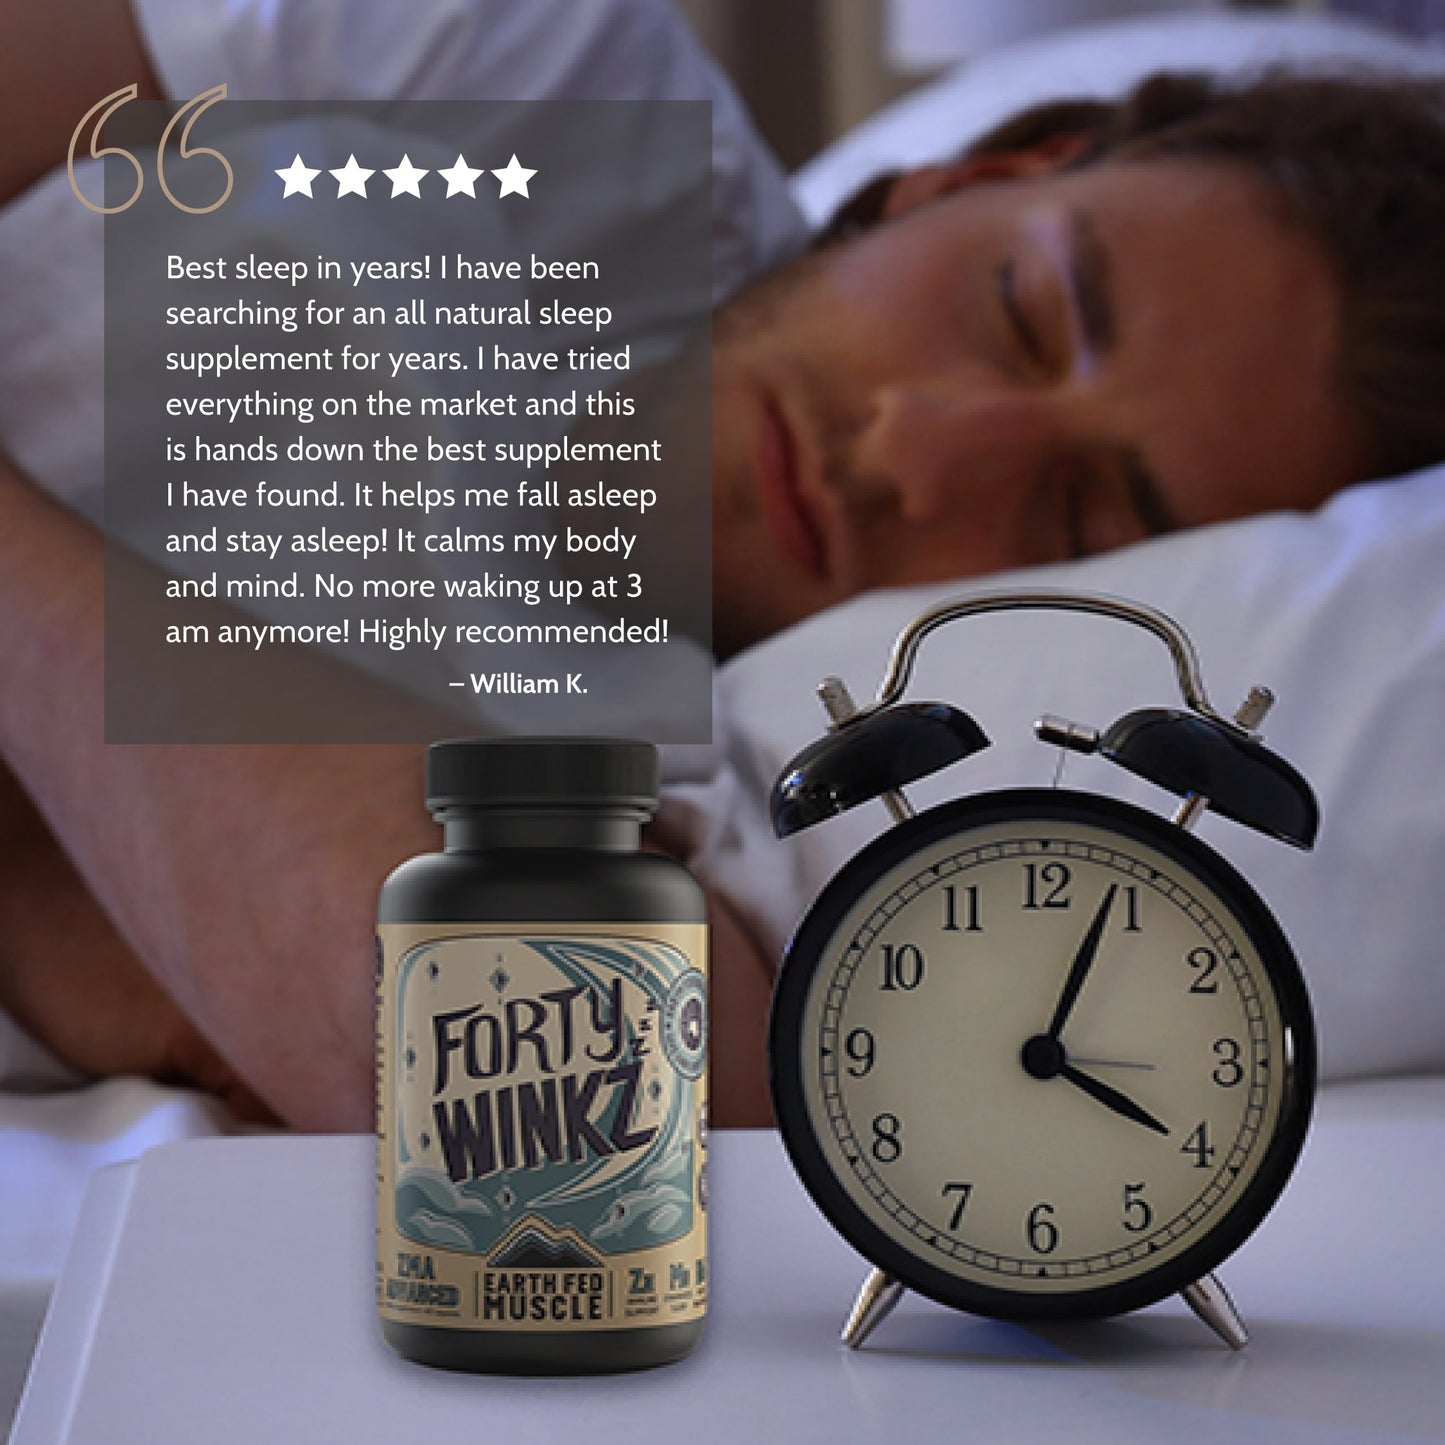 Forty Winkz Free Trial Customer Review. Best Sleep In Years. Waking up at 3am